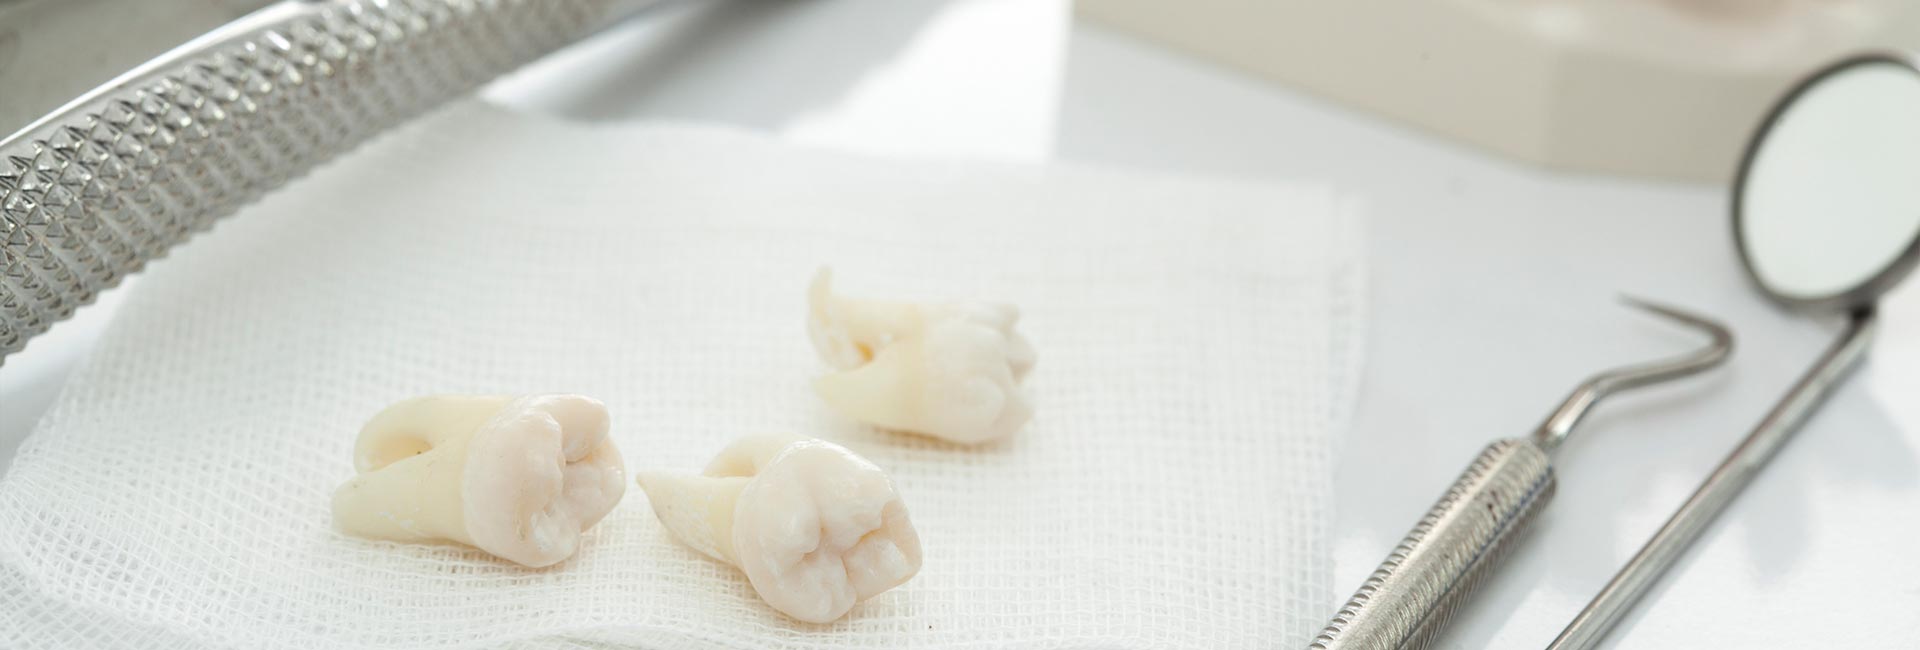 Extracted teeth with dental tools